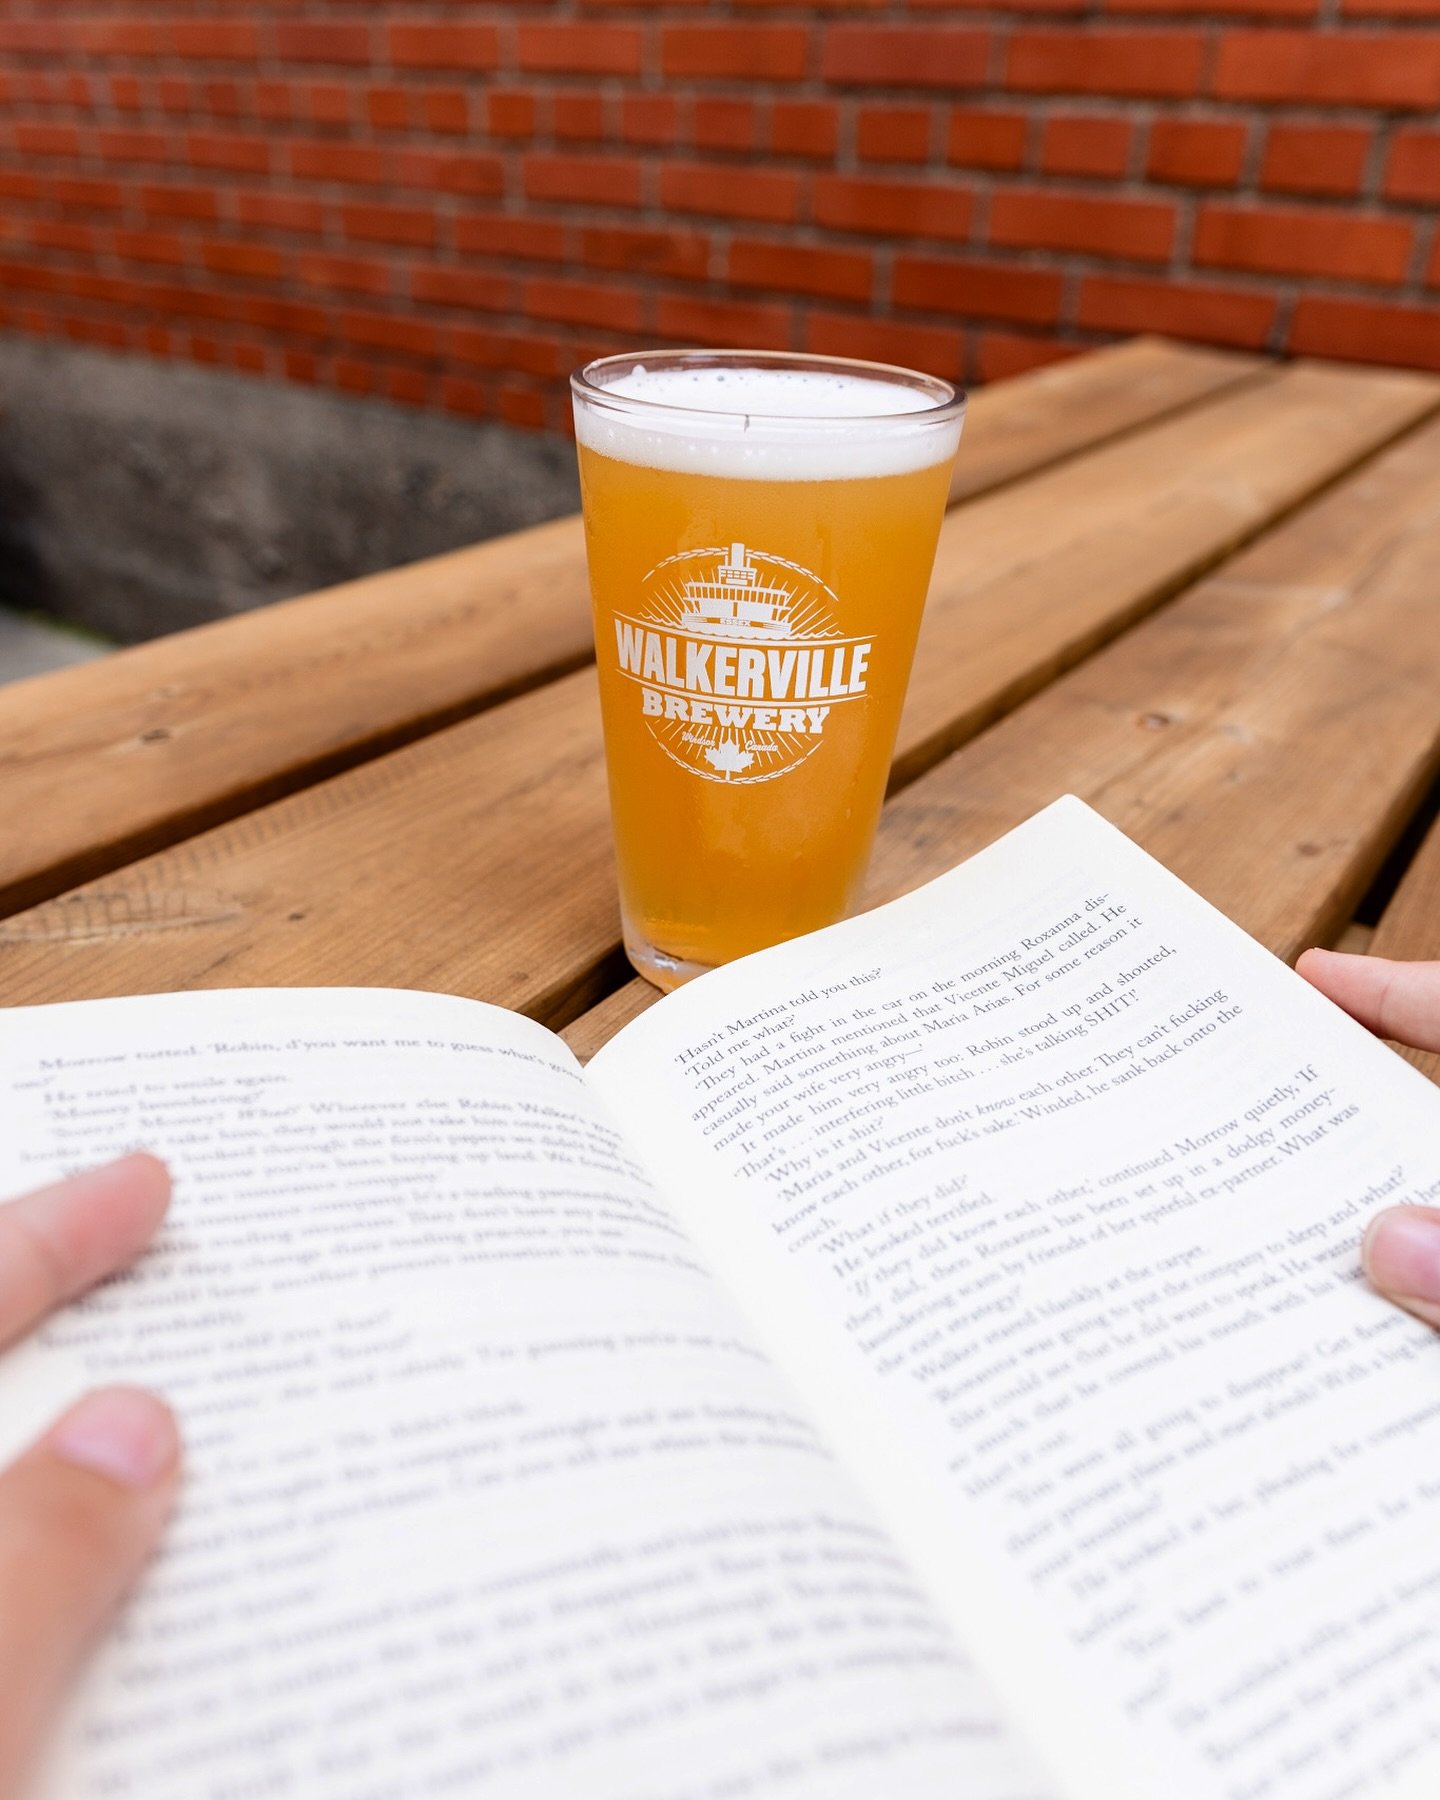 Our patio is the perfect place to read your favourite book&hellip; or a new one! Did you know we host a monthly Books &amp; Brews Club with @biblioasis_bookshop? 

Grab a pint and enjoy this month&rsquo;s Books &amp; Brews Club pick: &lsquo;The Dispo